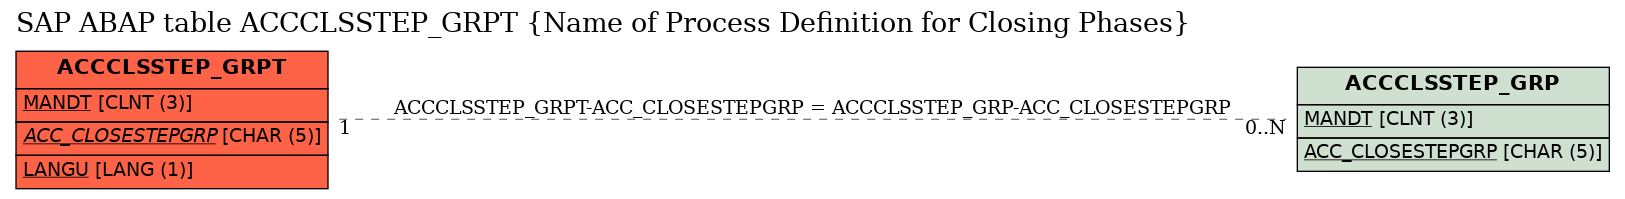 E-R Diagram for table ACCCLSSTEP_GRPT (Name of Process Definition for Closing Phases)